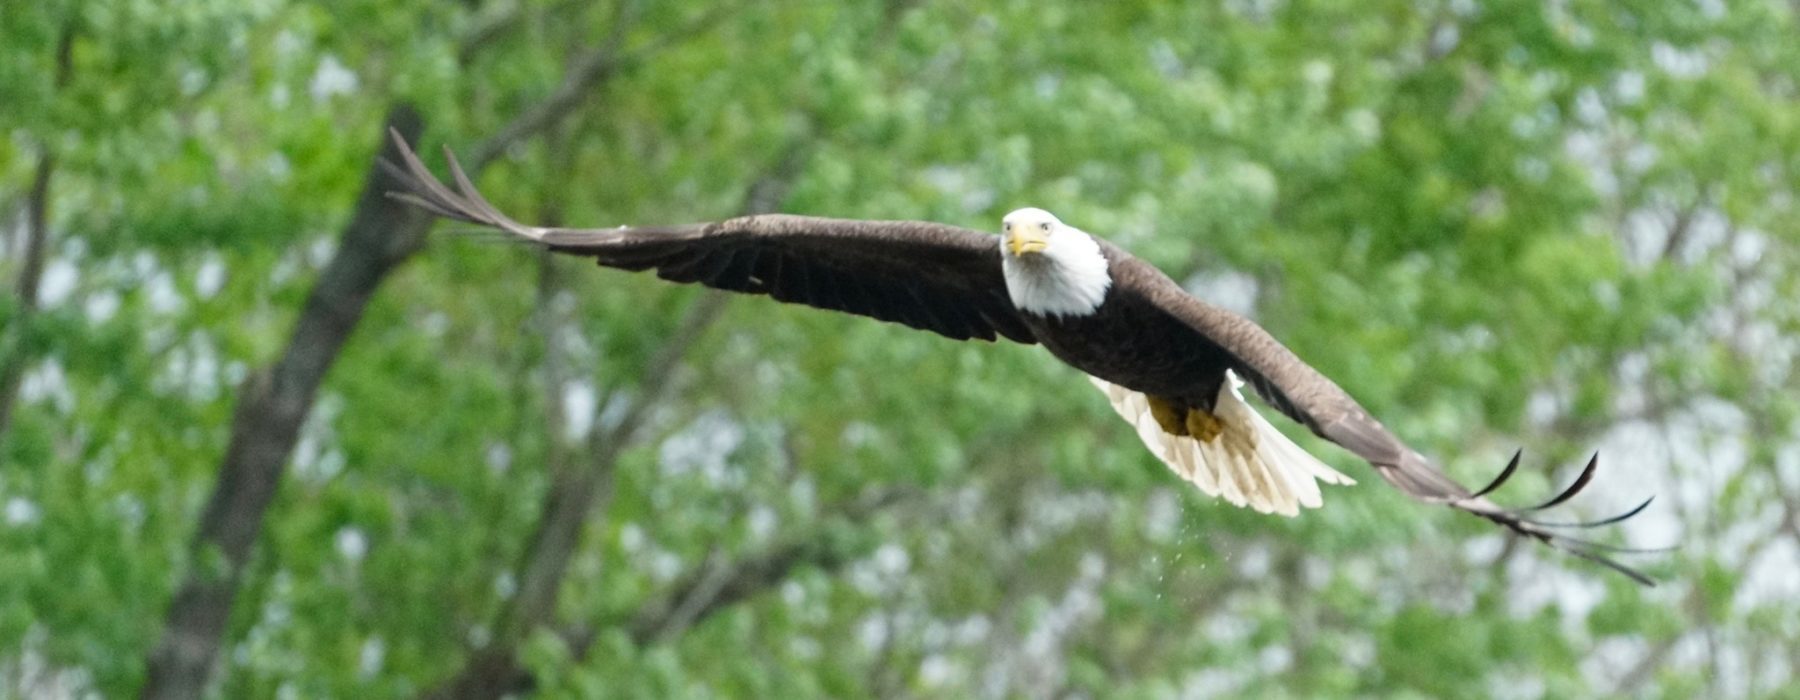 Bald eagle soaring over a Vermont river.